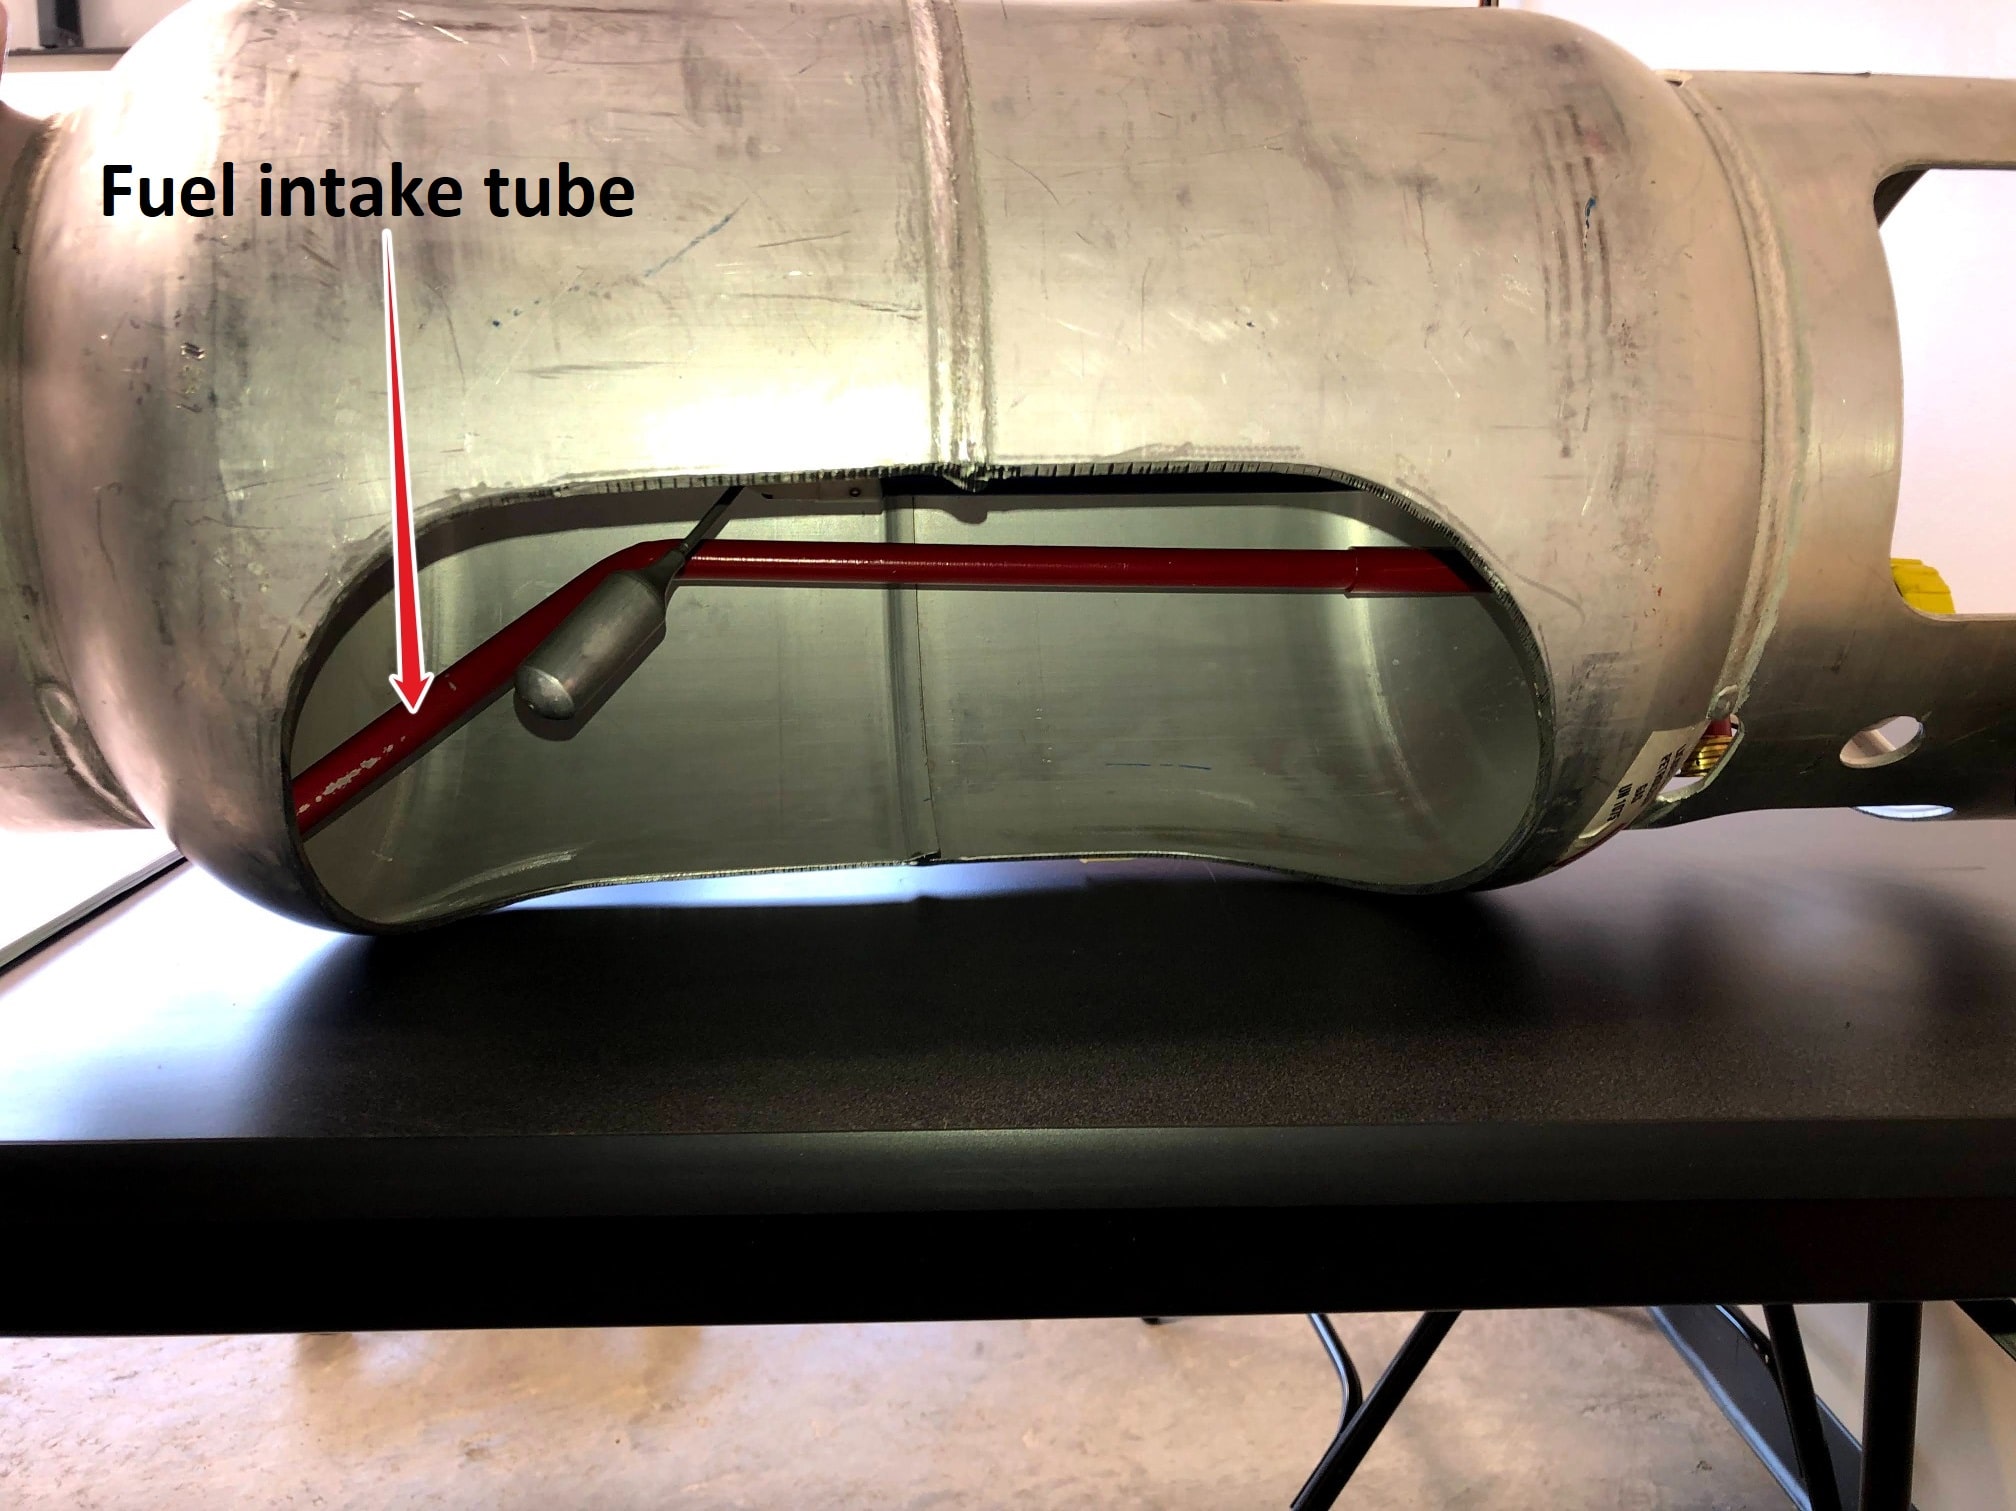 The location of the fuel intake tube in a propane fuel tank